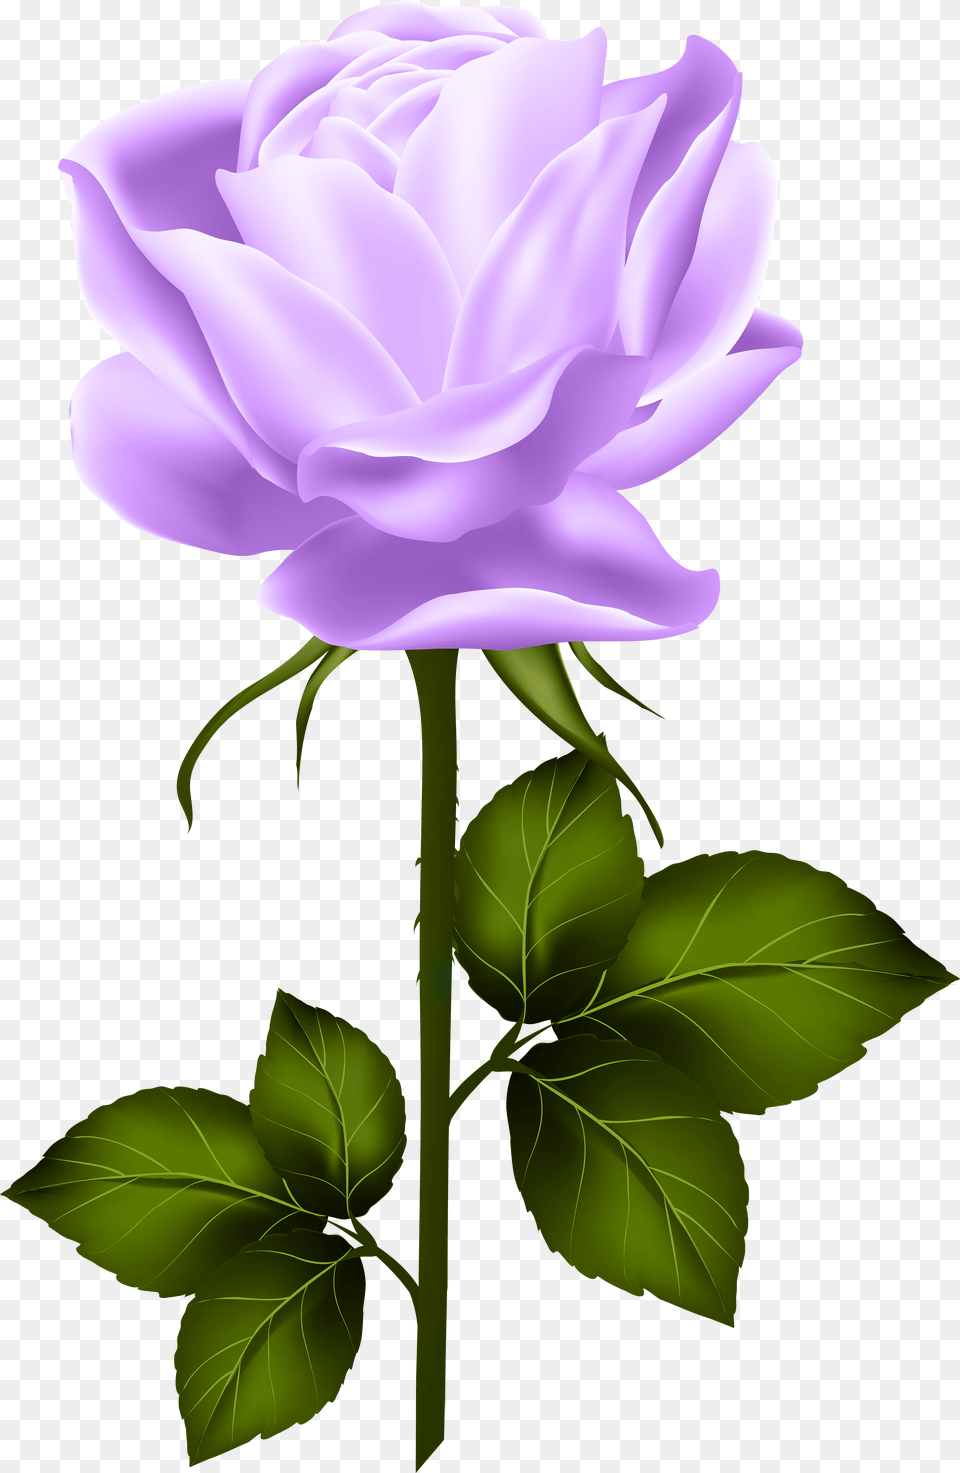 Shabby Chic Flowers Hybrid Tea Roses Single Rose Purple Rose With Stem Free Transparent Png